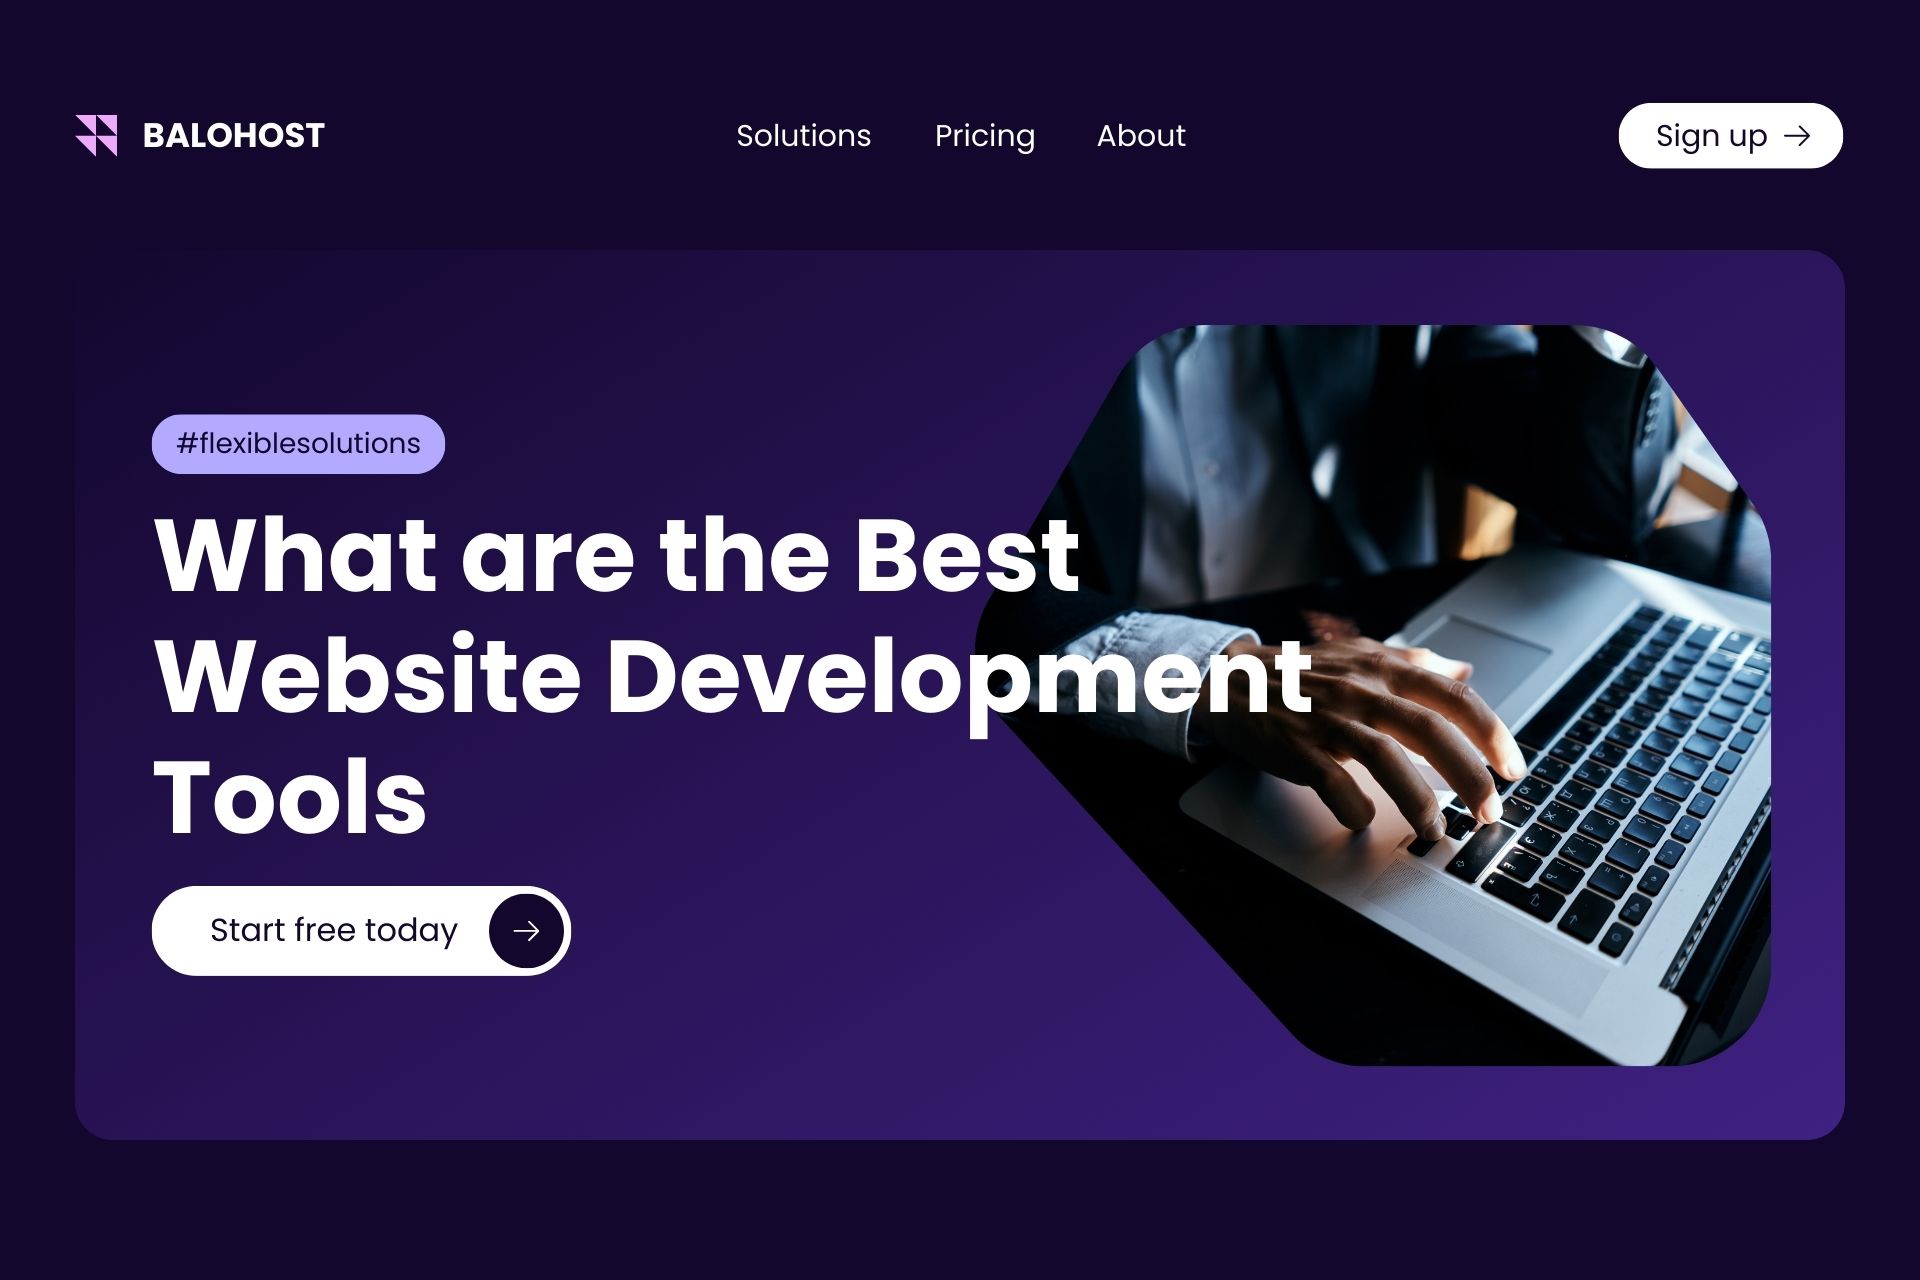 What are the Best Web Development Tools?